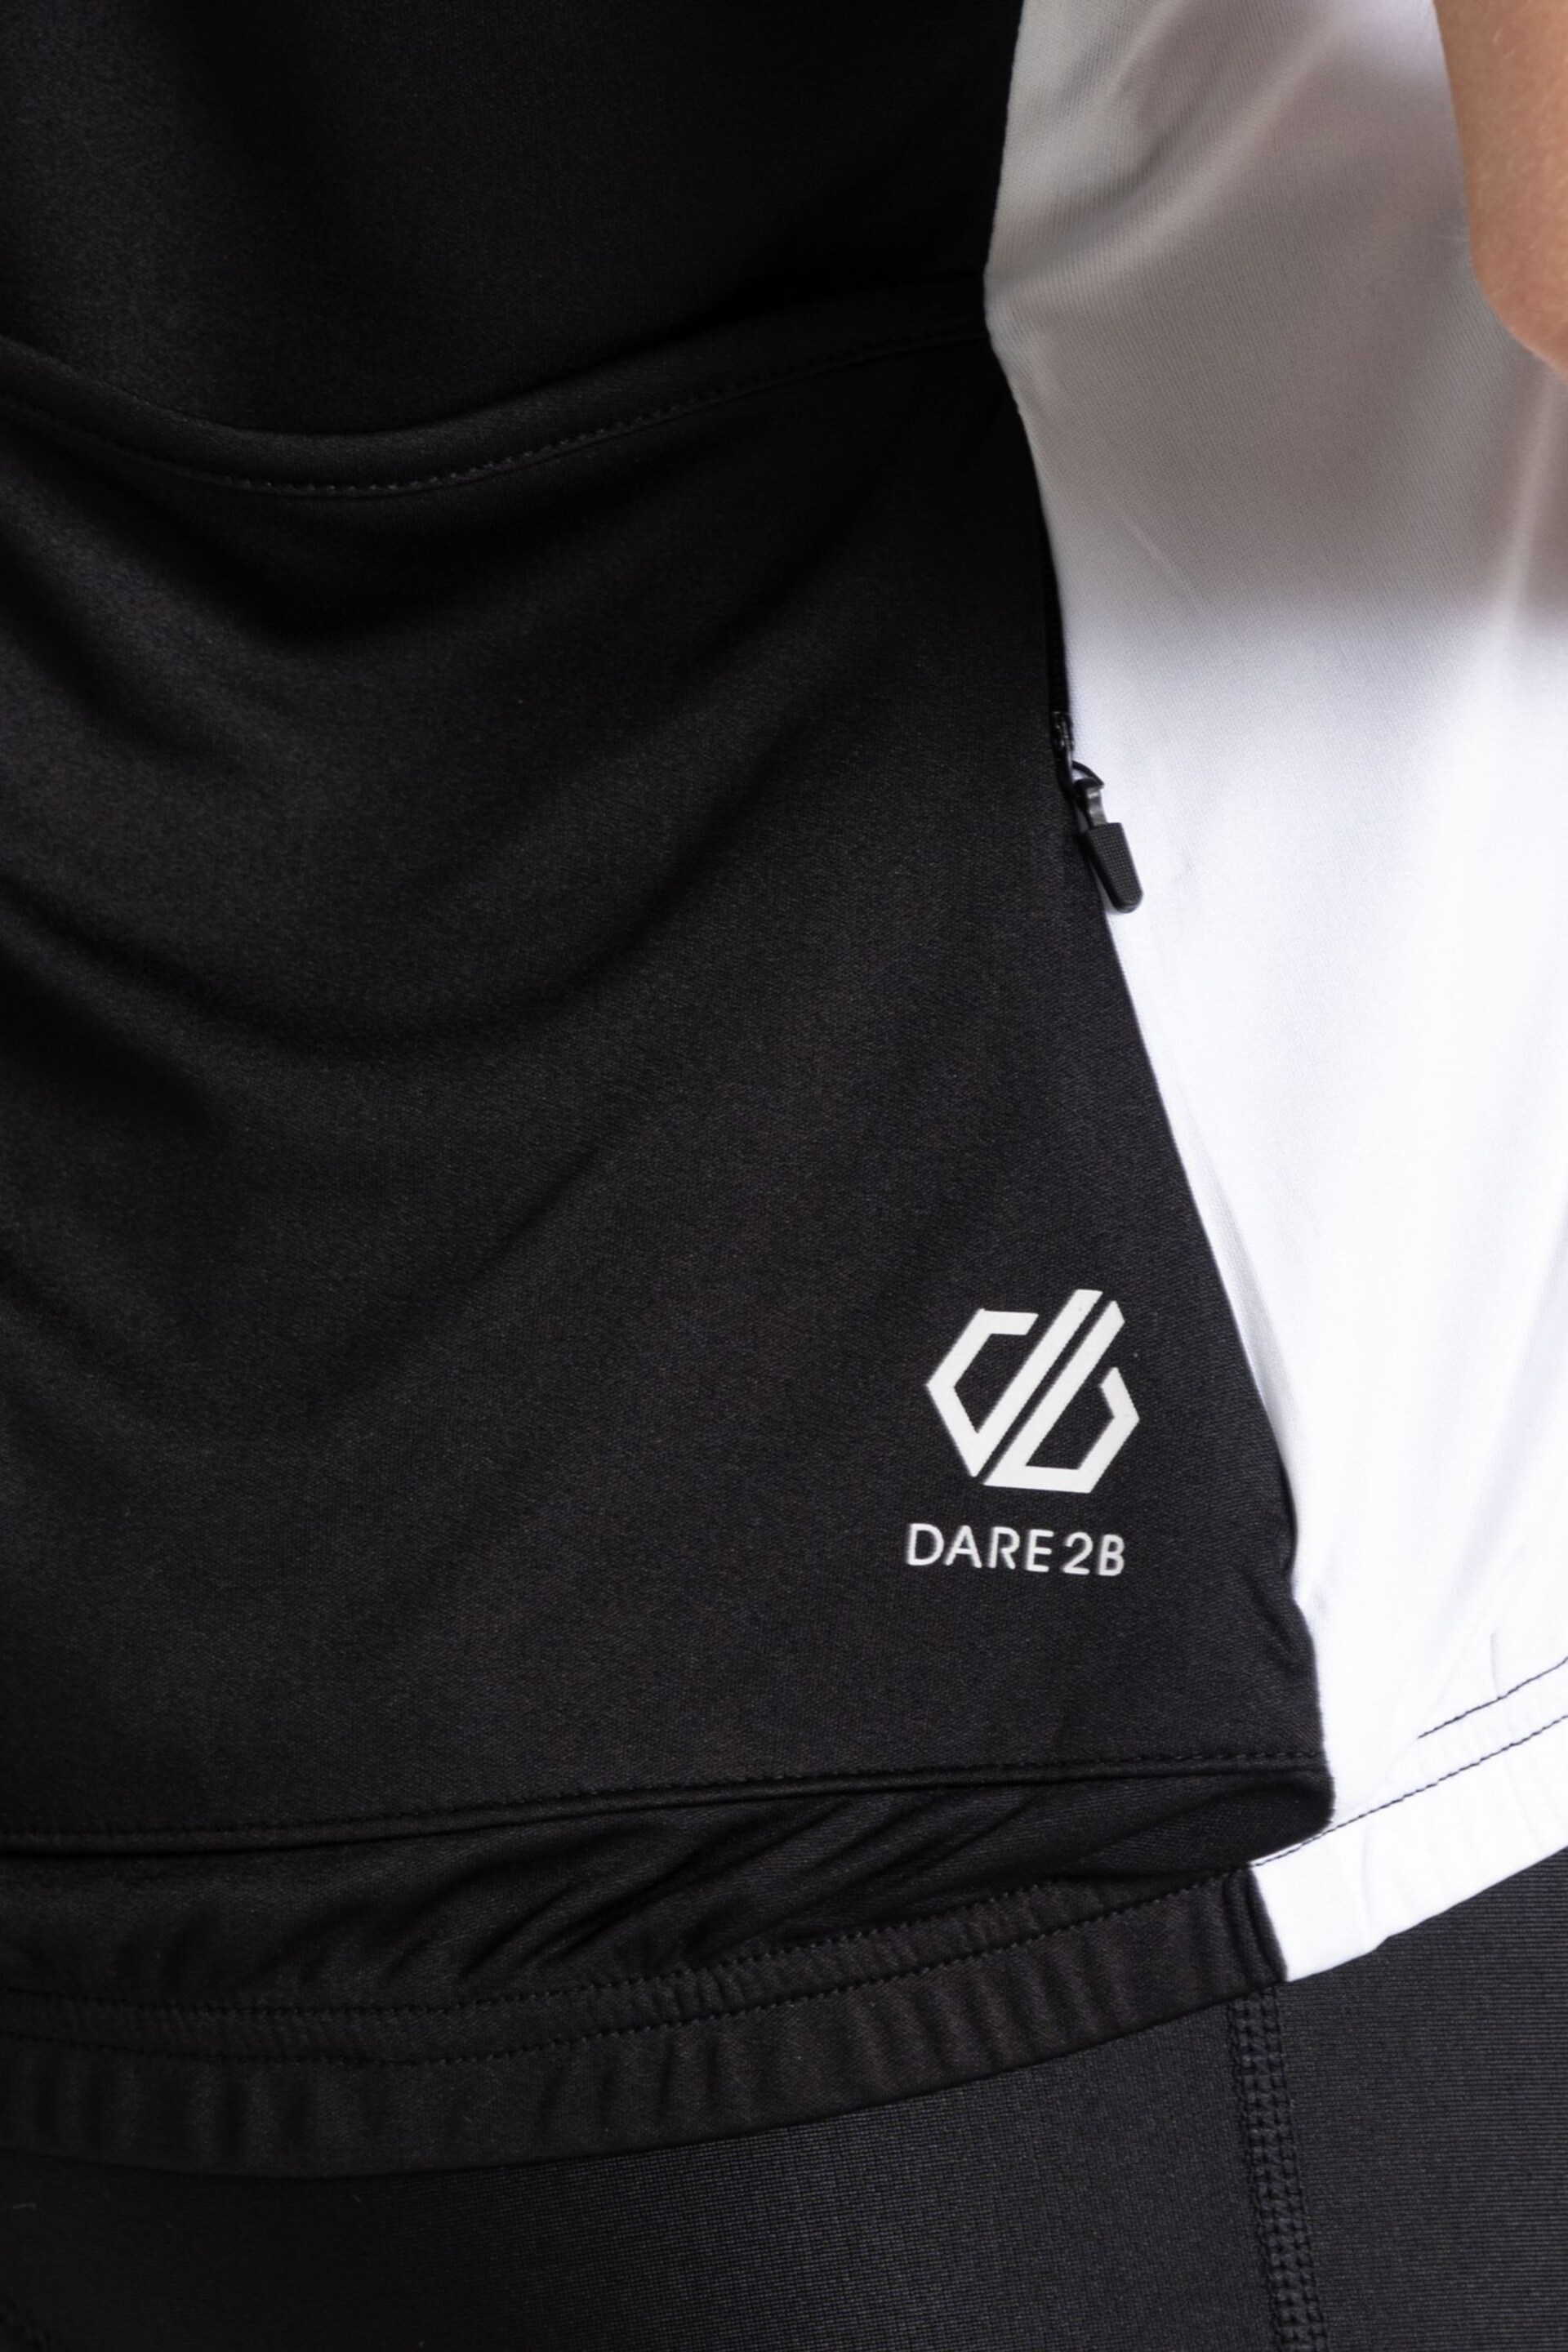 Dare 2b Compassion III Cycle Black Jersey - Image 4 of 4